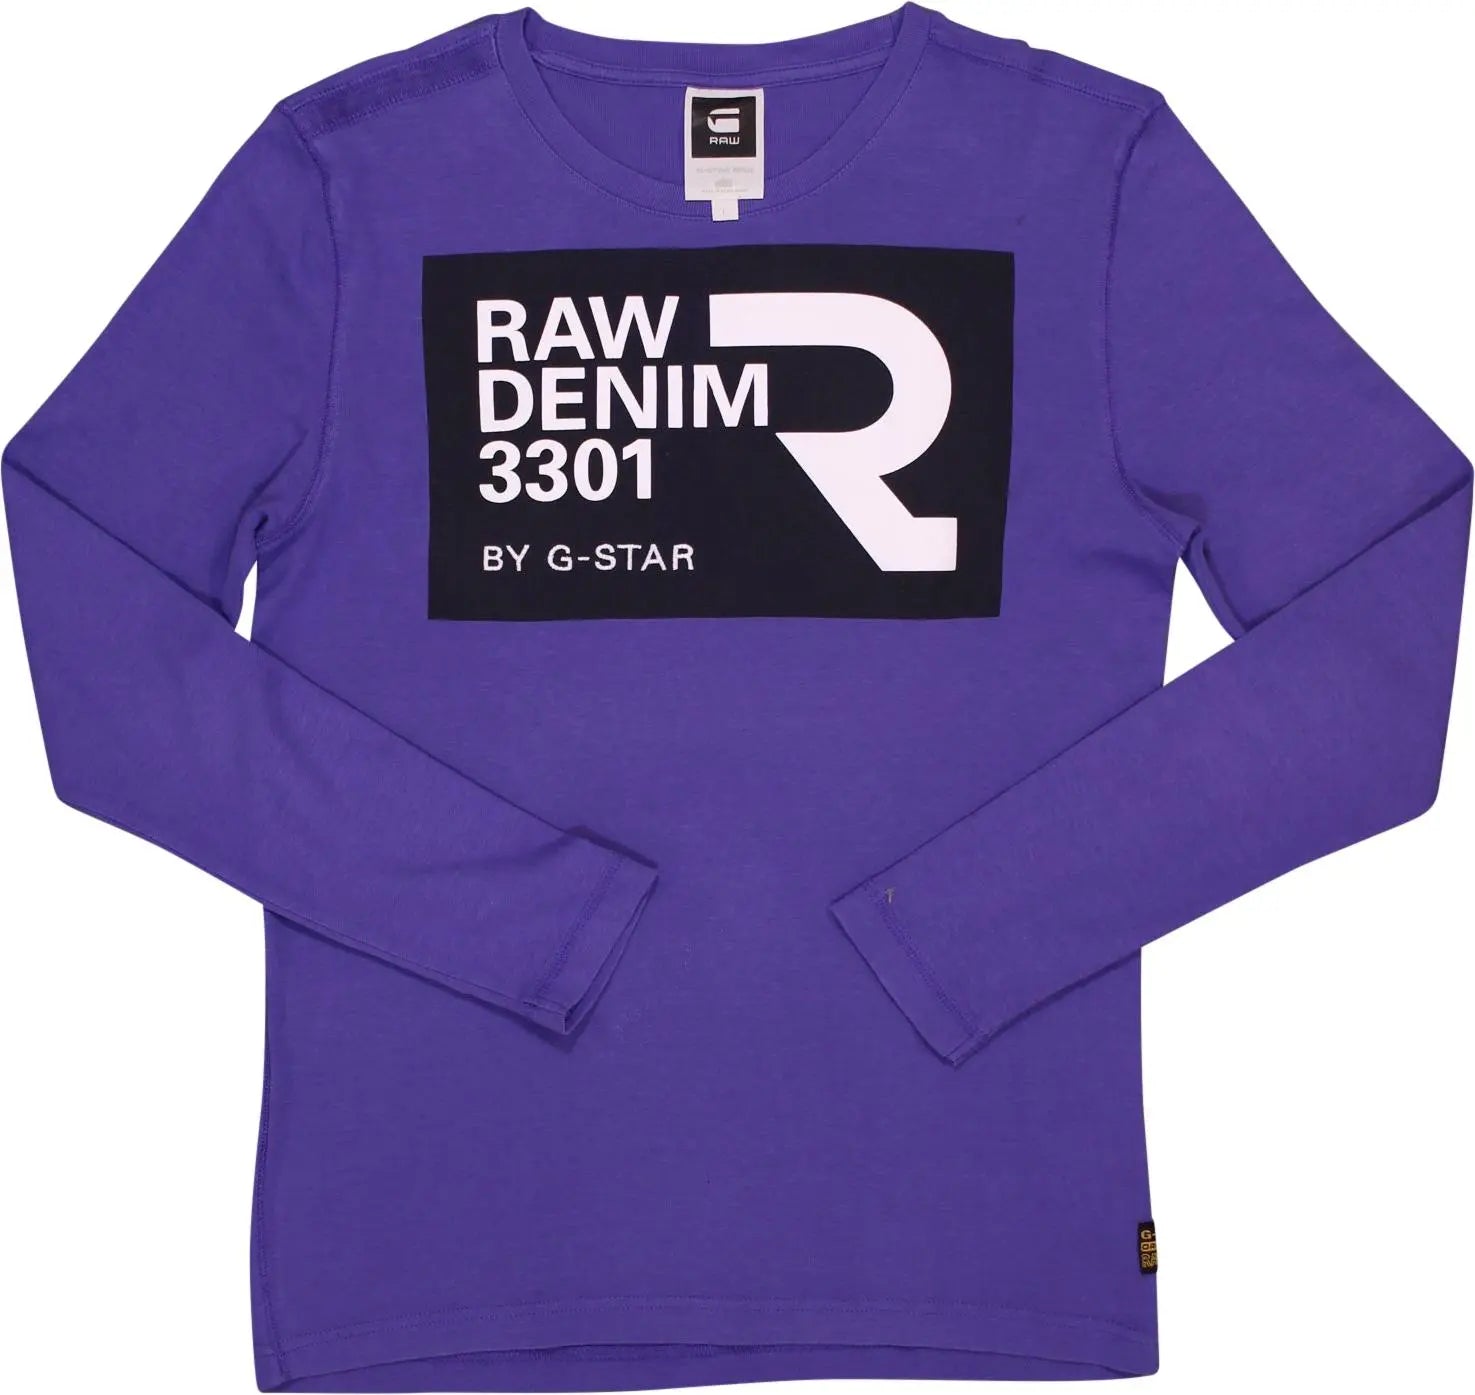 Pre-owned and vintage G-Star RAW